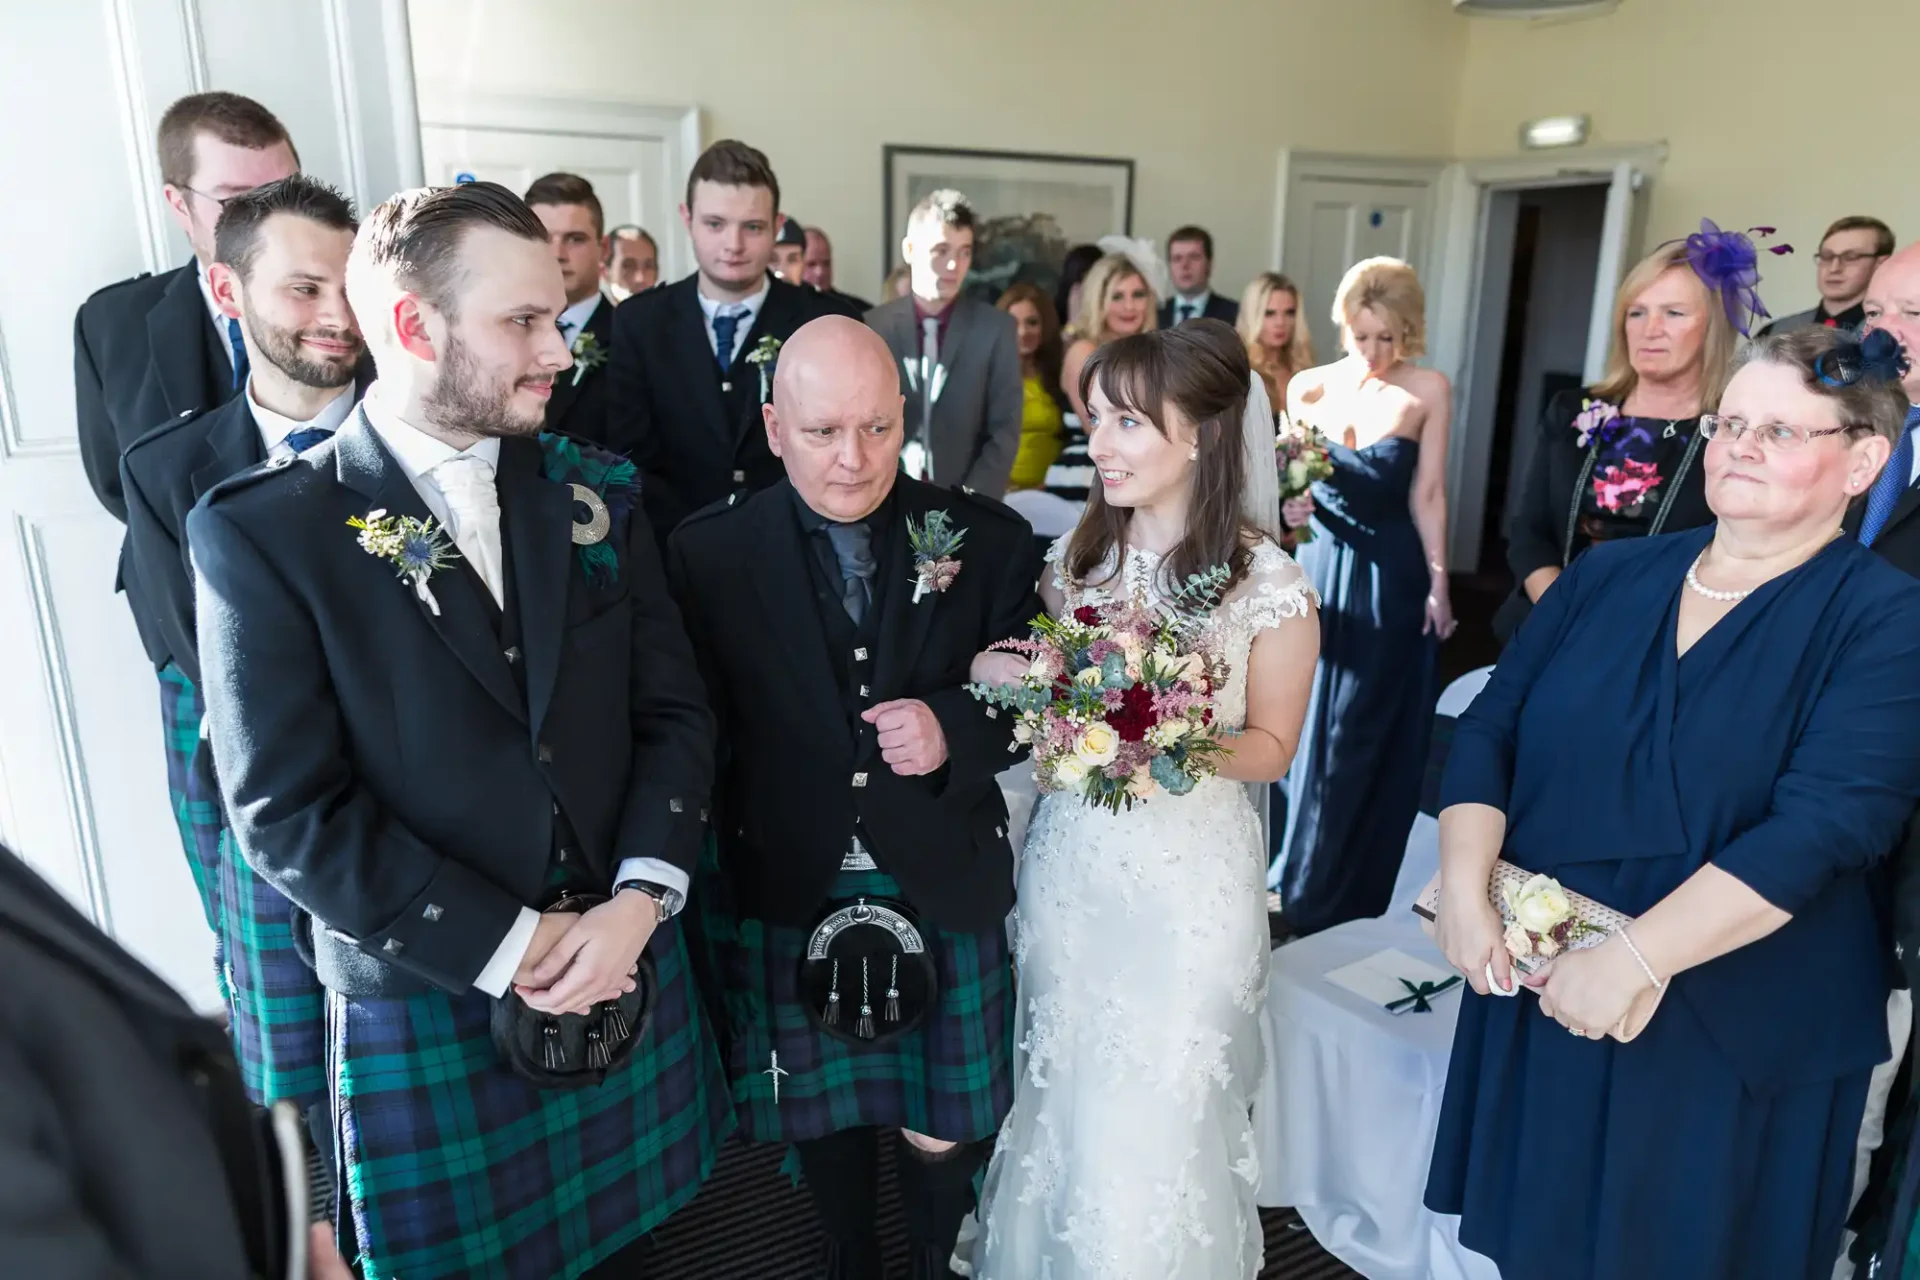 A wedding ceremony with a bride and groom in a kilt surrounded by guests in formal attire, conveying a joyful atmosphere indoors.